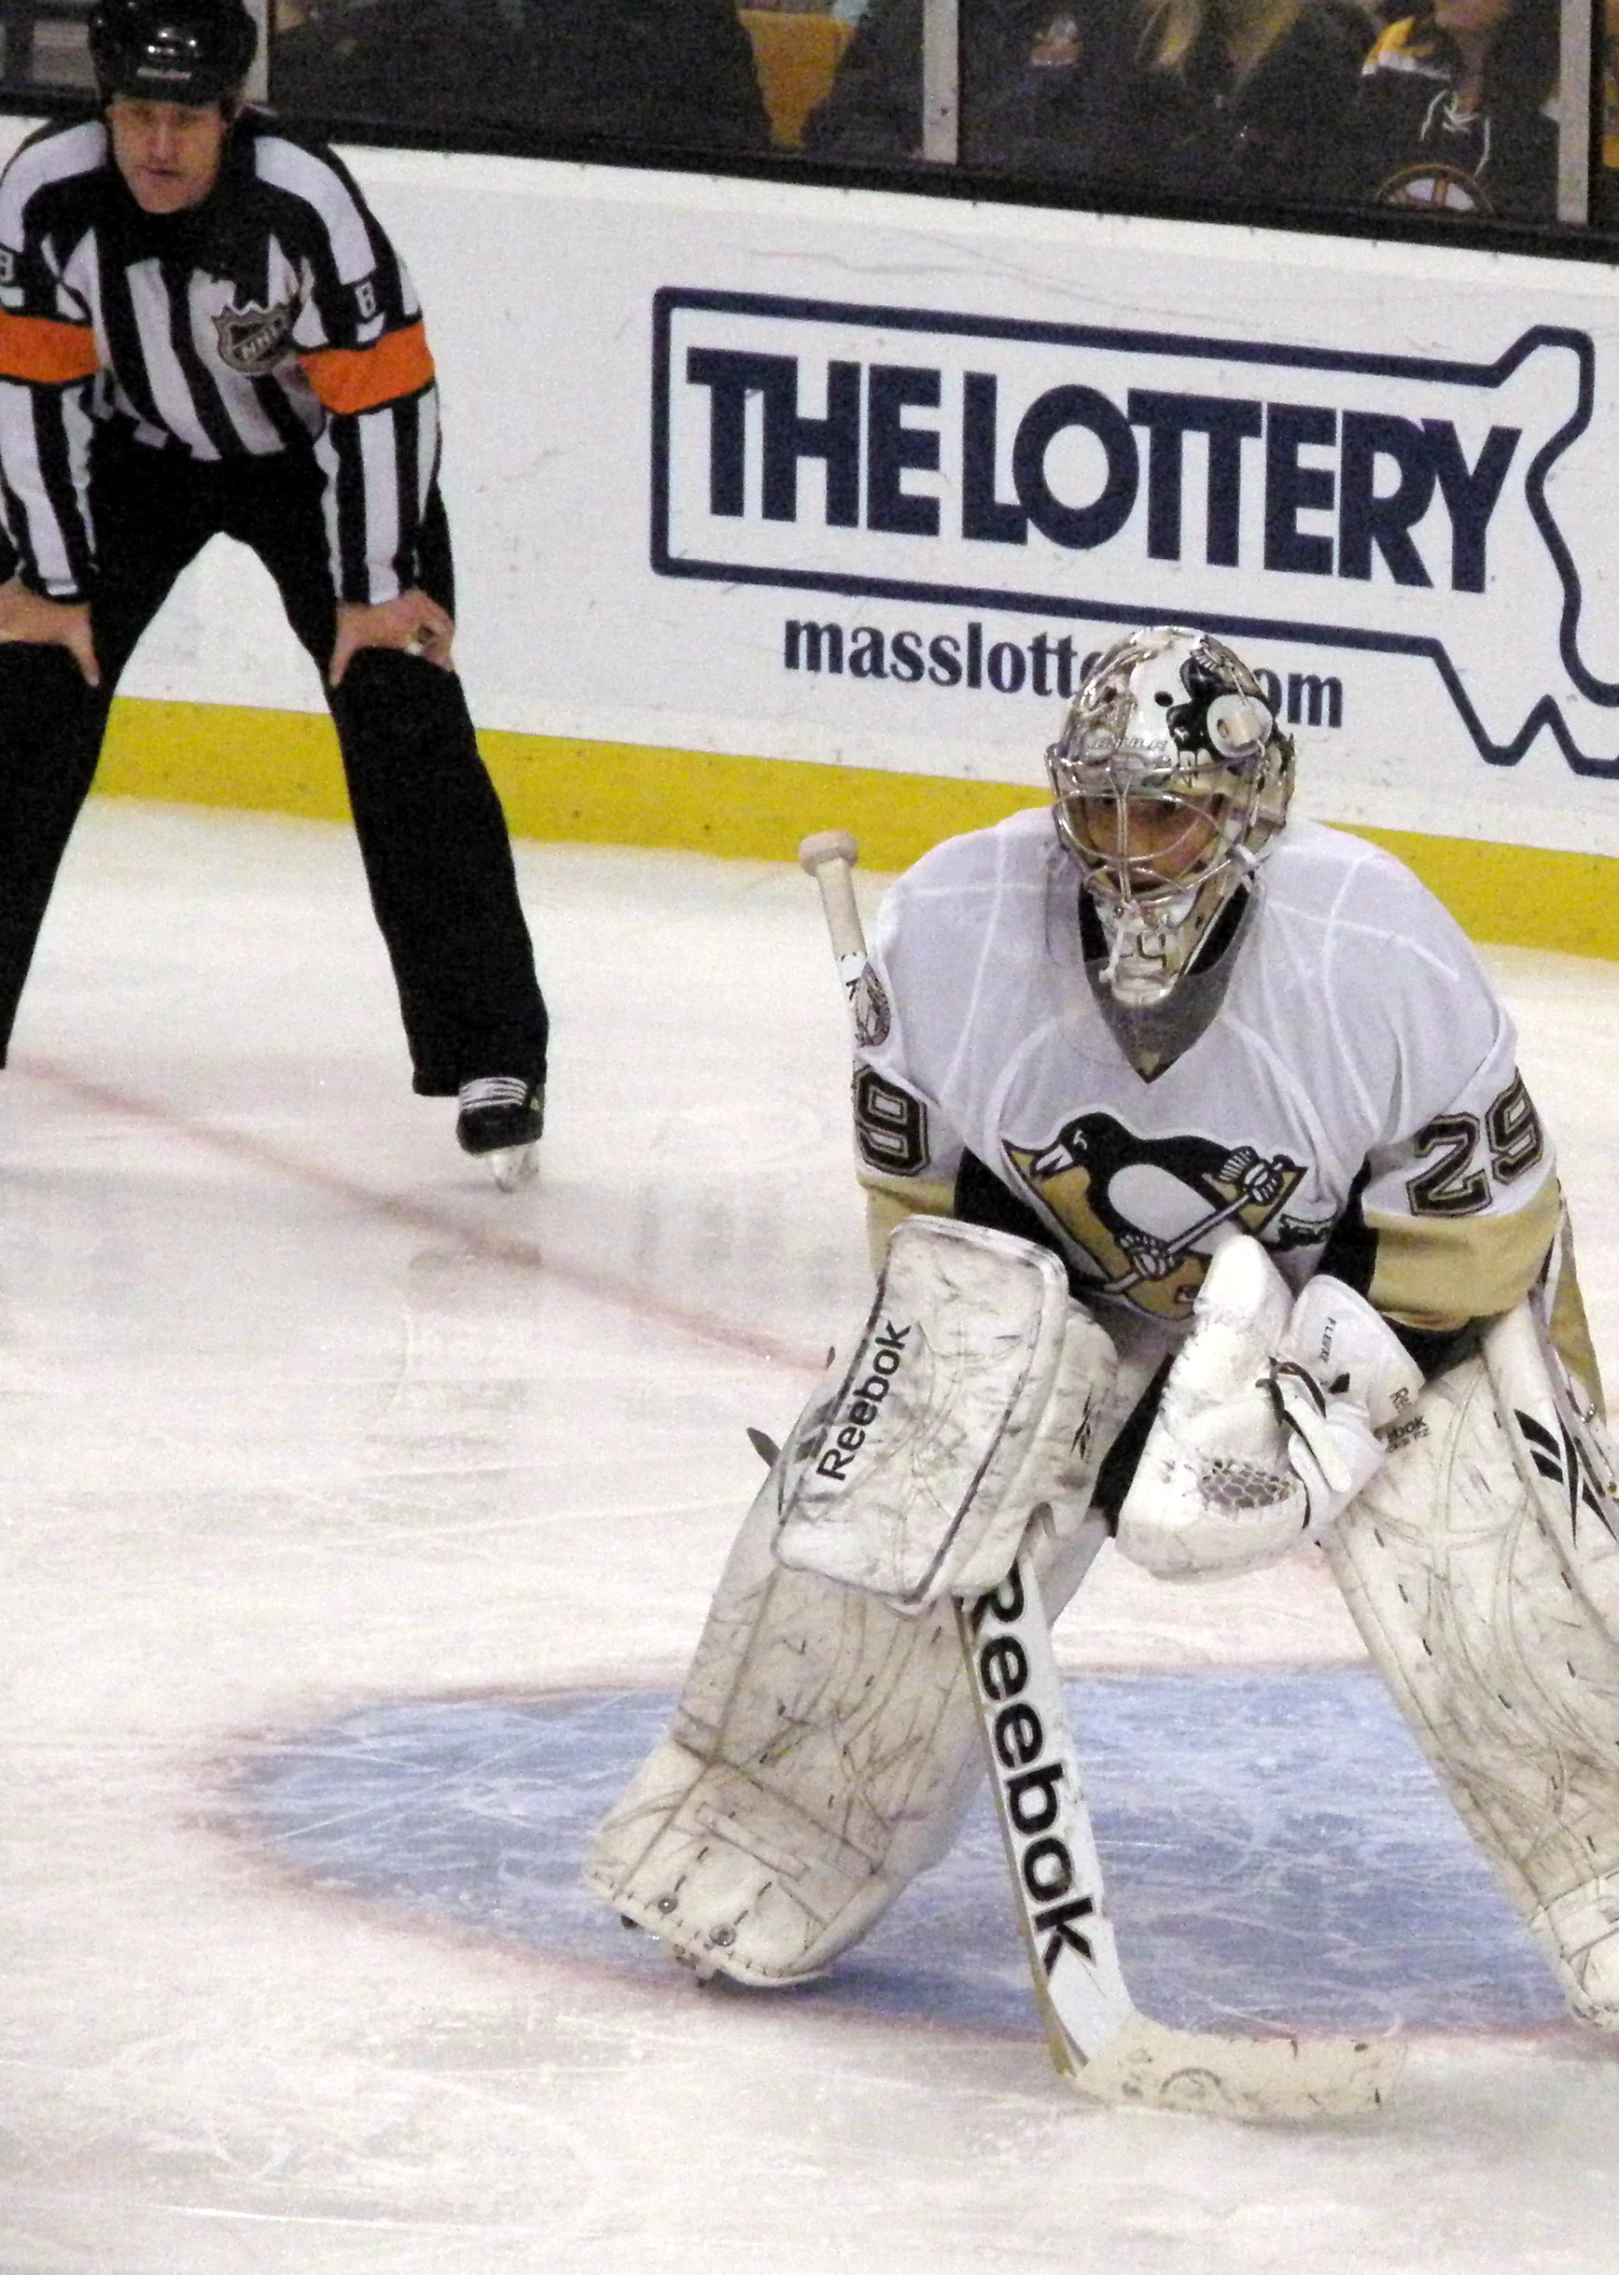 an ice hockey goaltender in white waiting to hit the puck